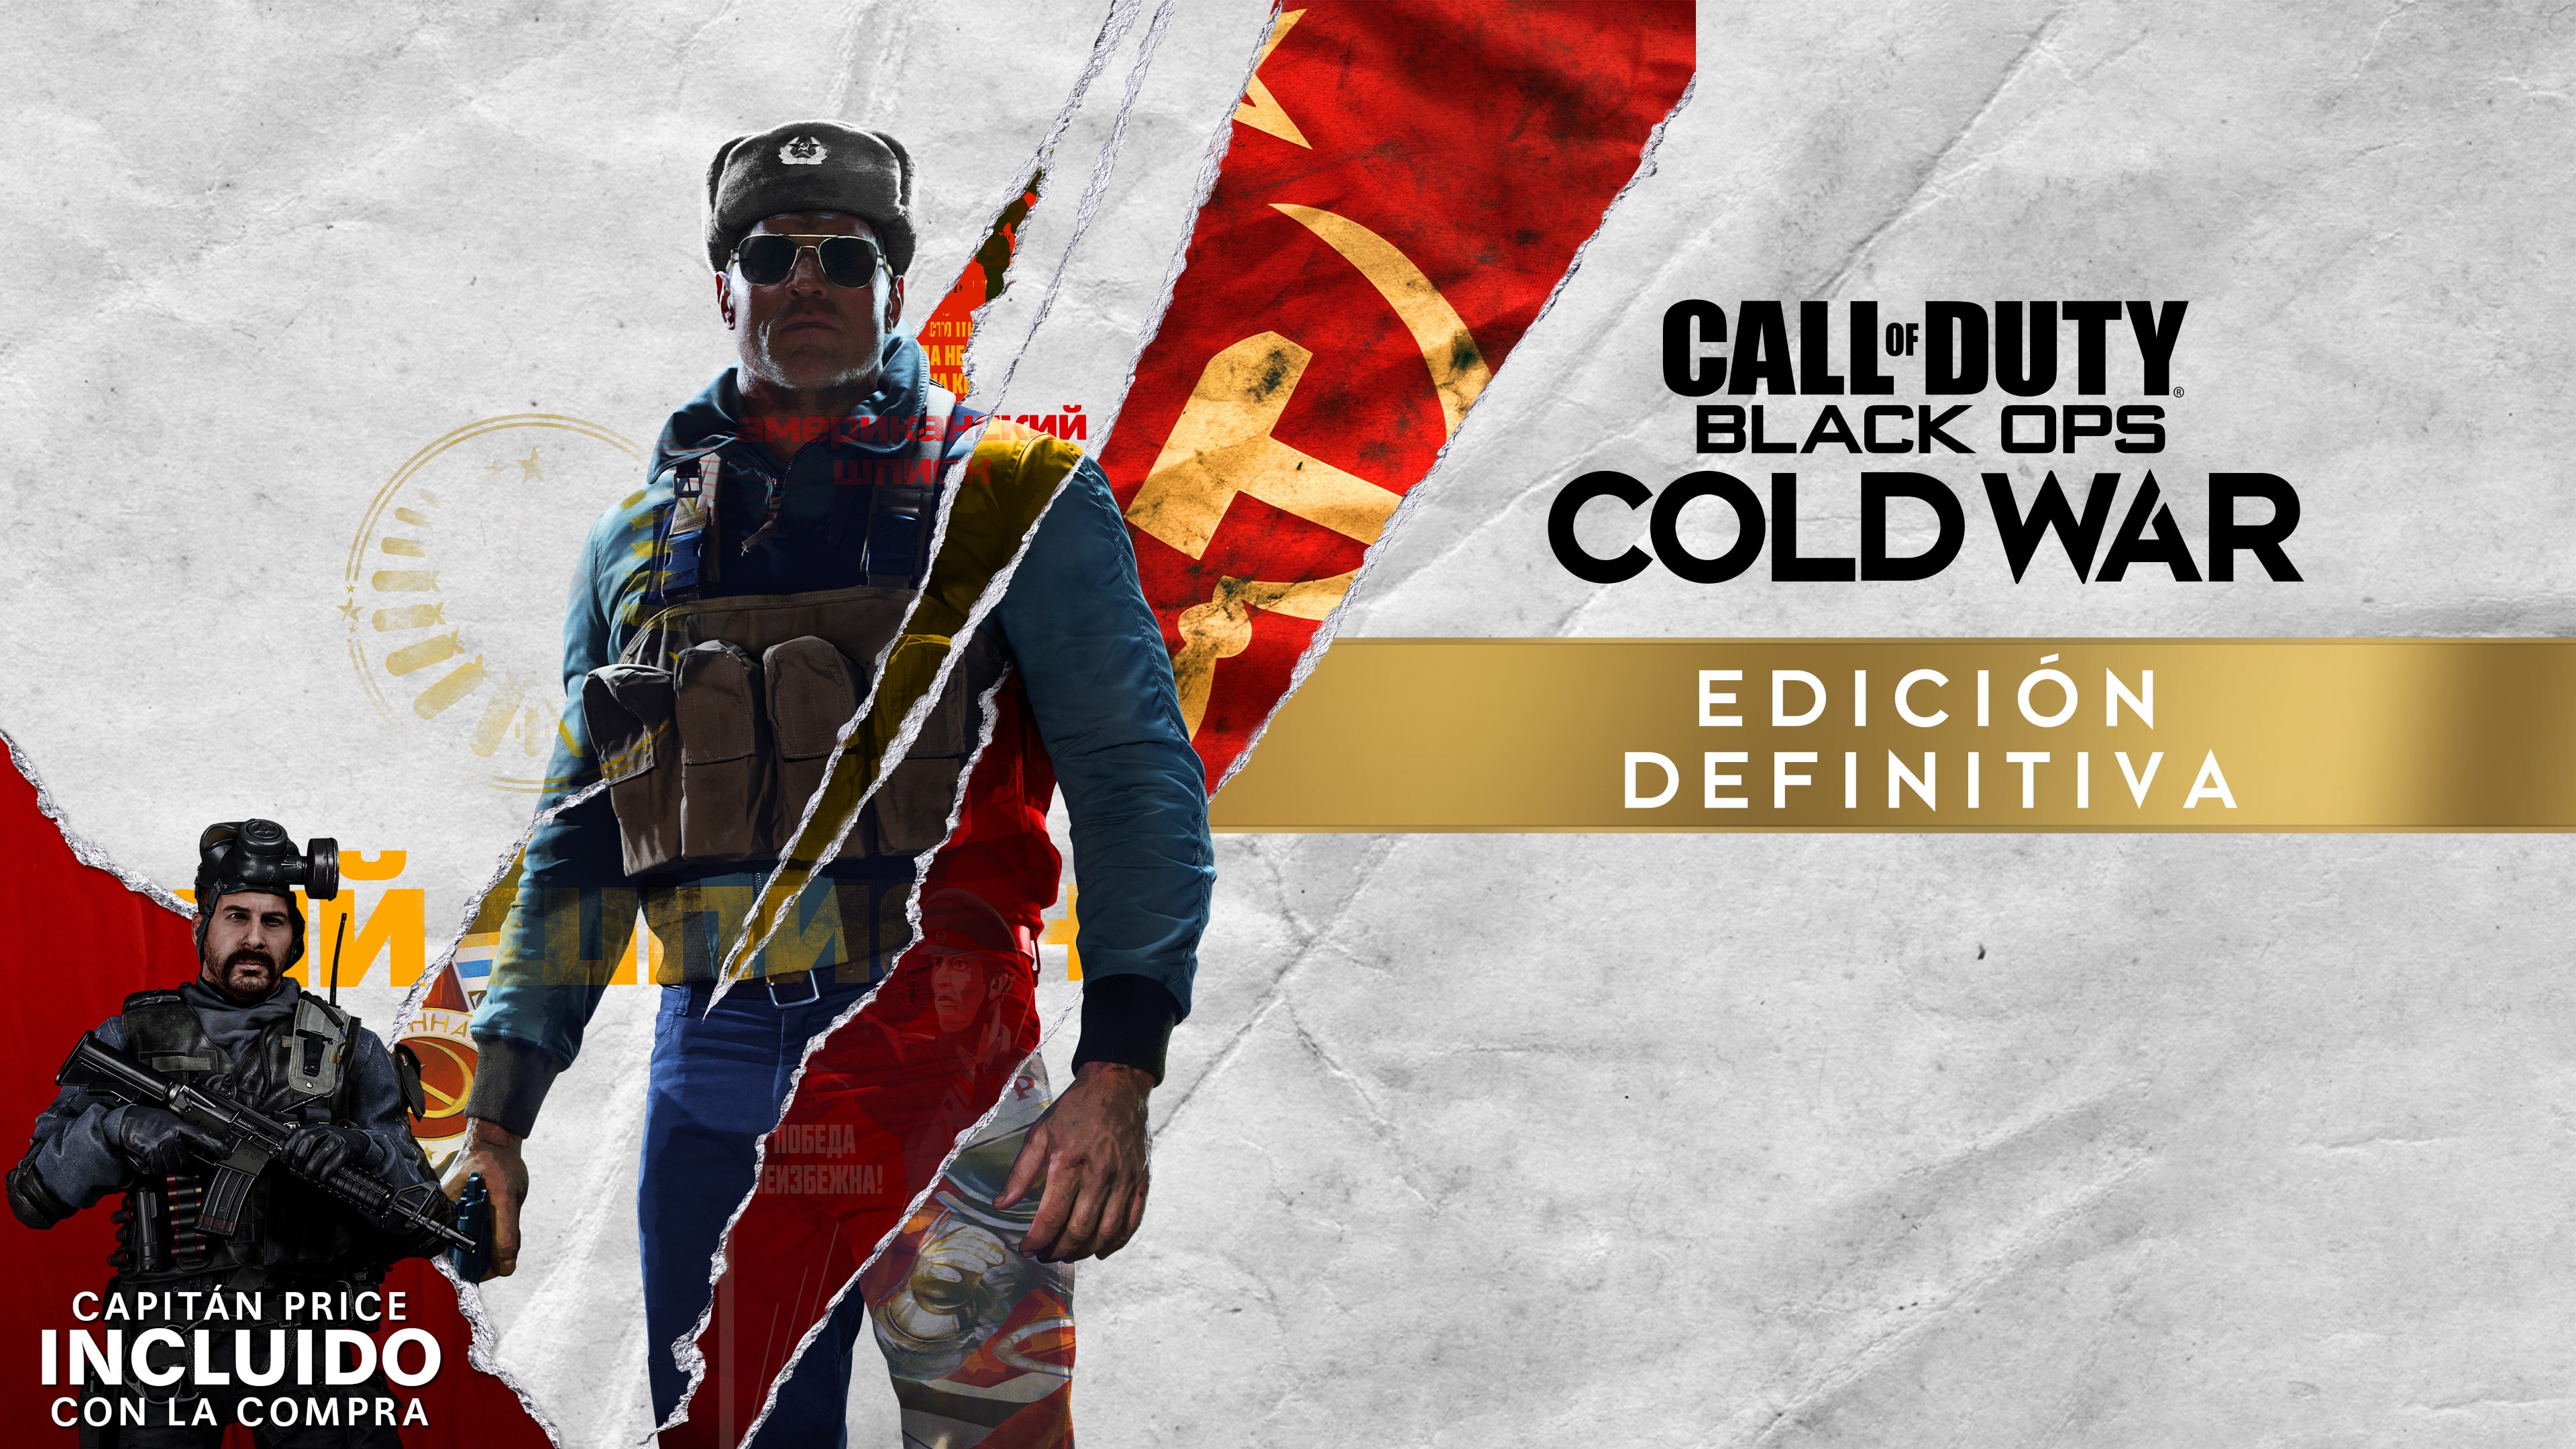 can you play call of duty cold war on ps4